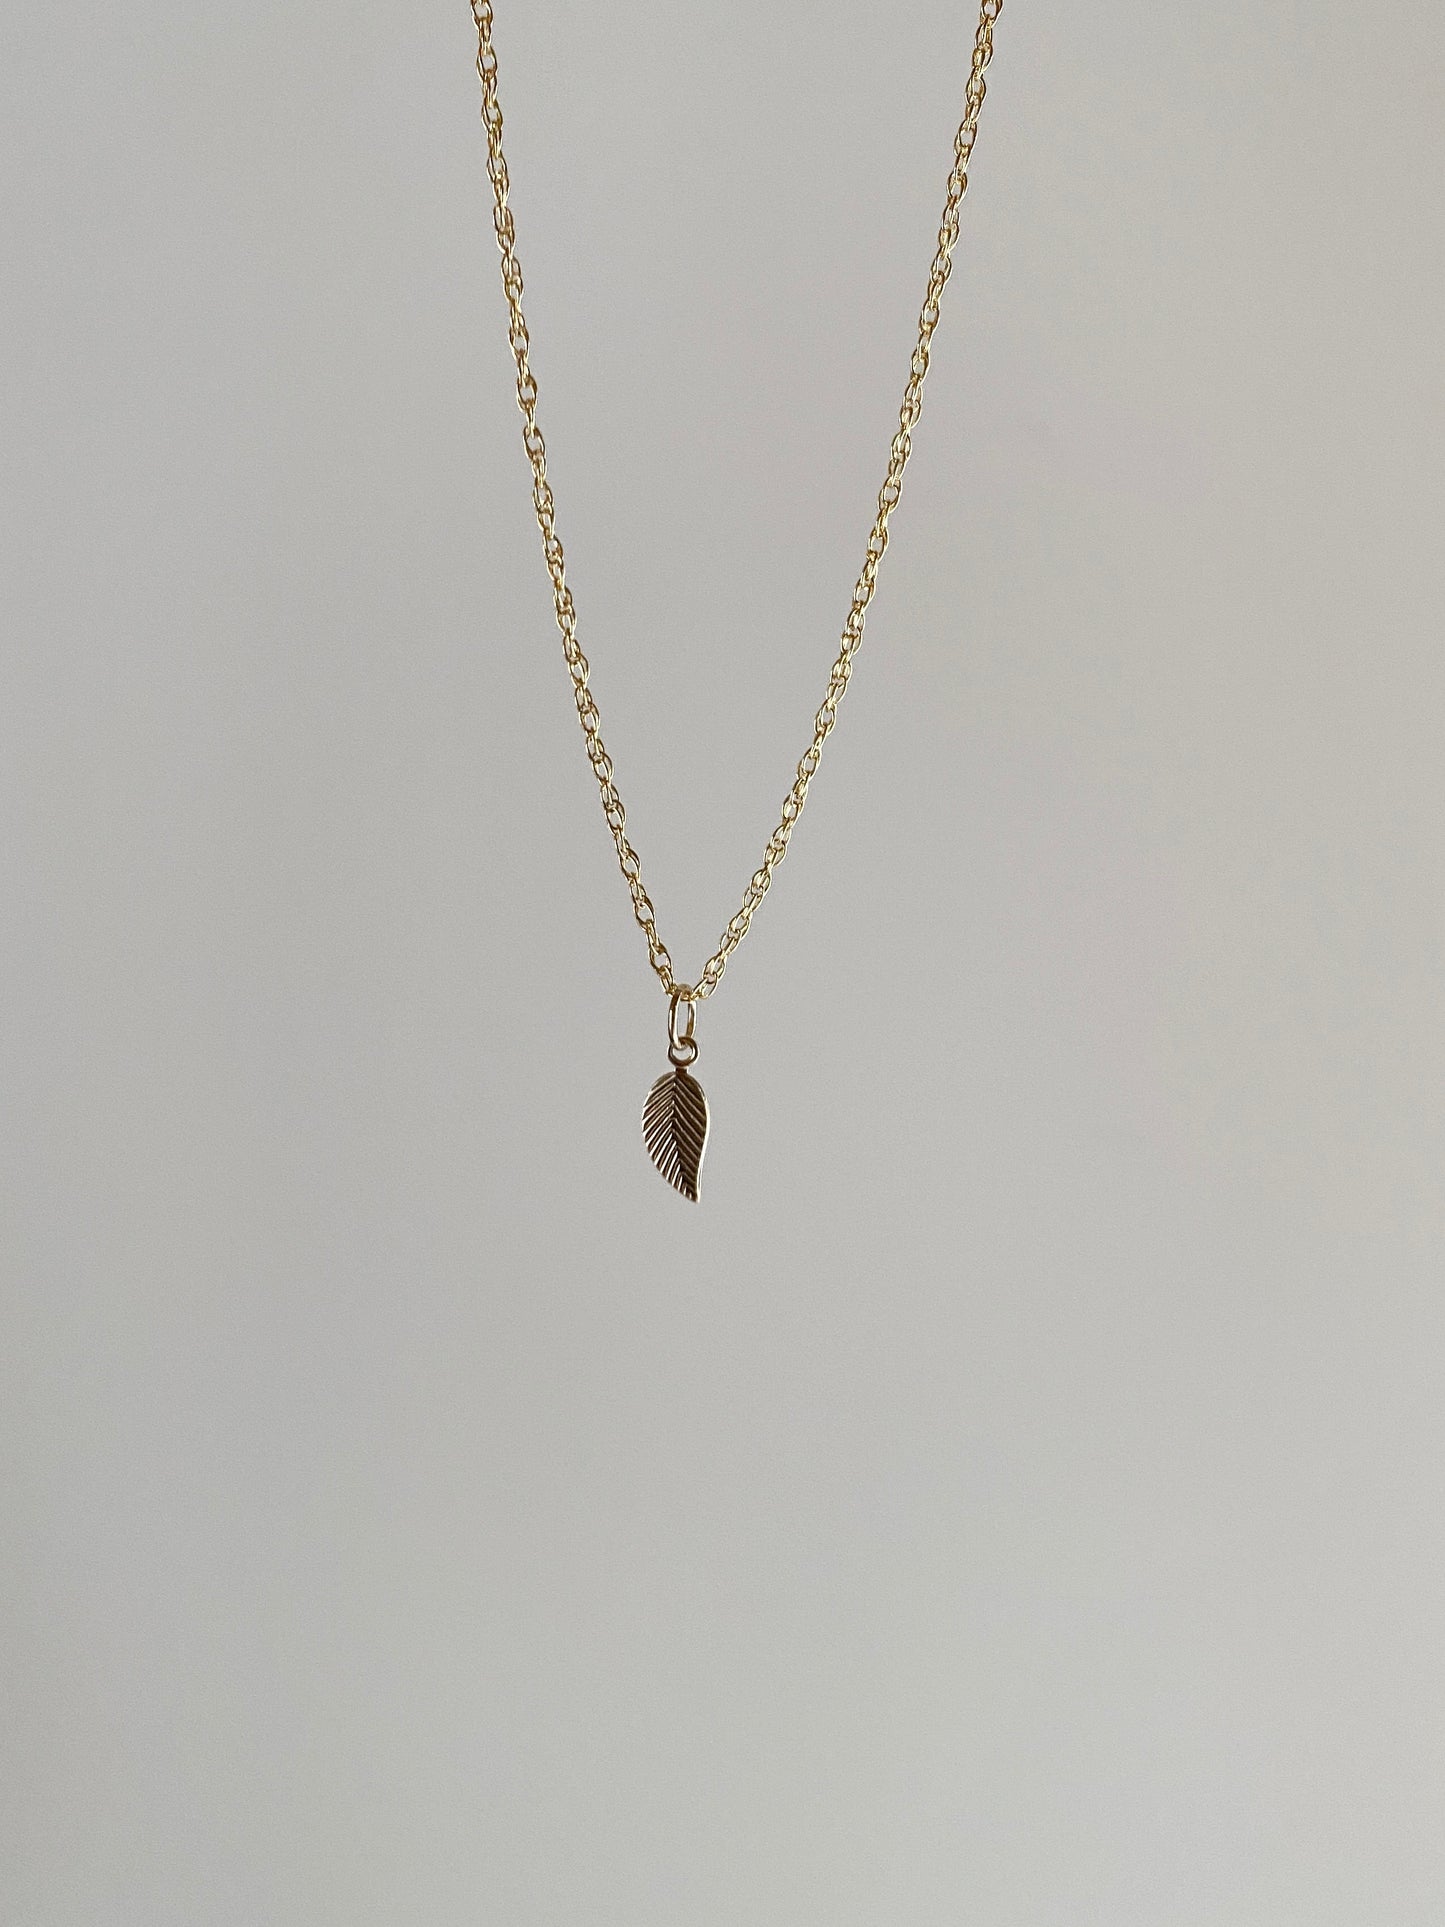 Golden Leaf ~ 14K Yellow Gold Fill Necklace